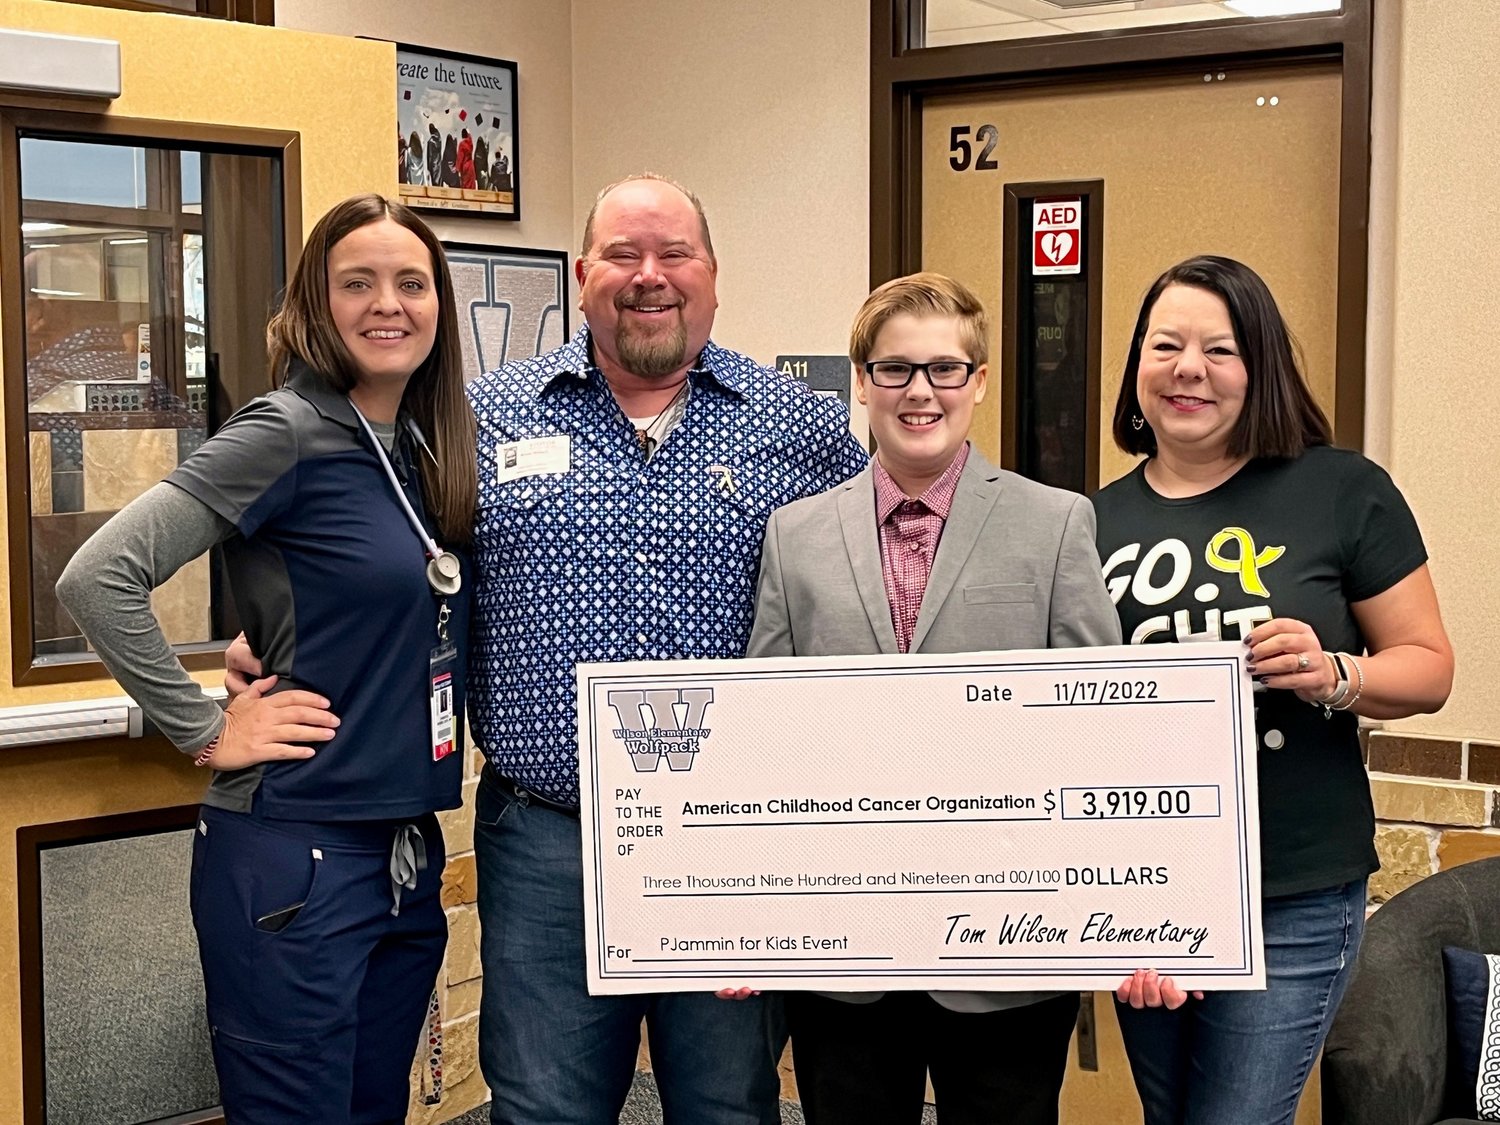 Wilson Elementary School students and staff recently held a fundraiser and donated nearly $4,000 to the American Childhood Cancer Organization! This fundraiser event began last year in honor of a former Wilson student, now in junior high school, who was diagnosed with a brain tumor.